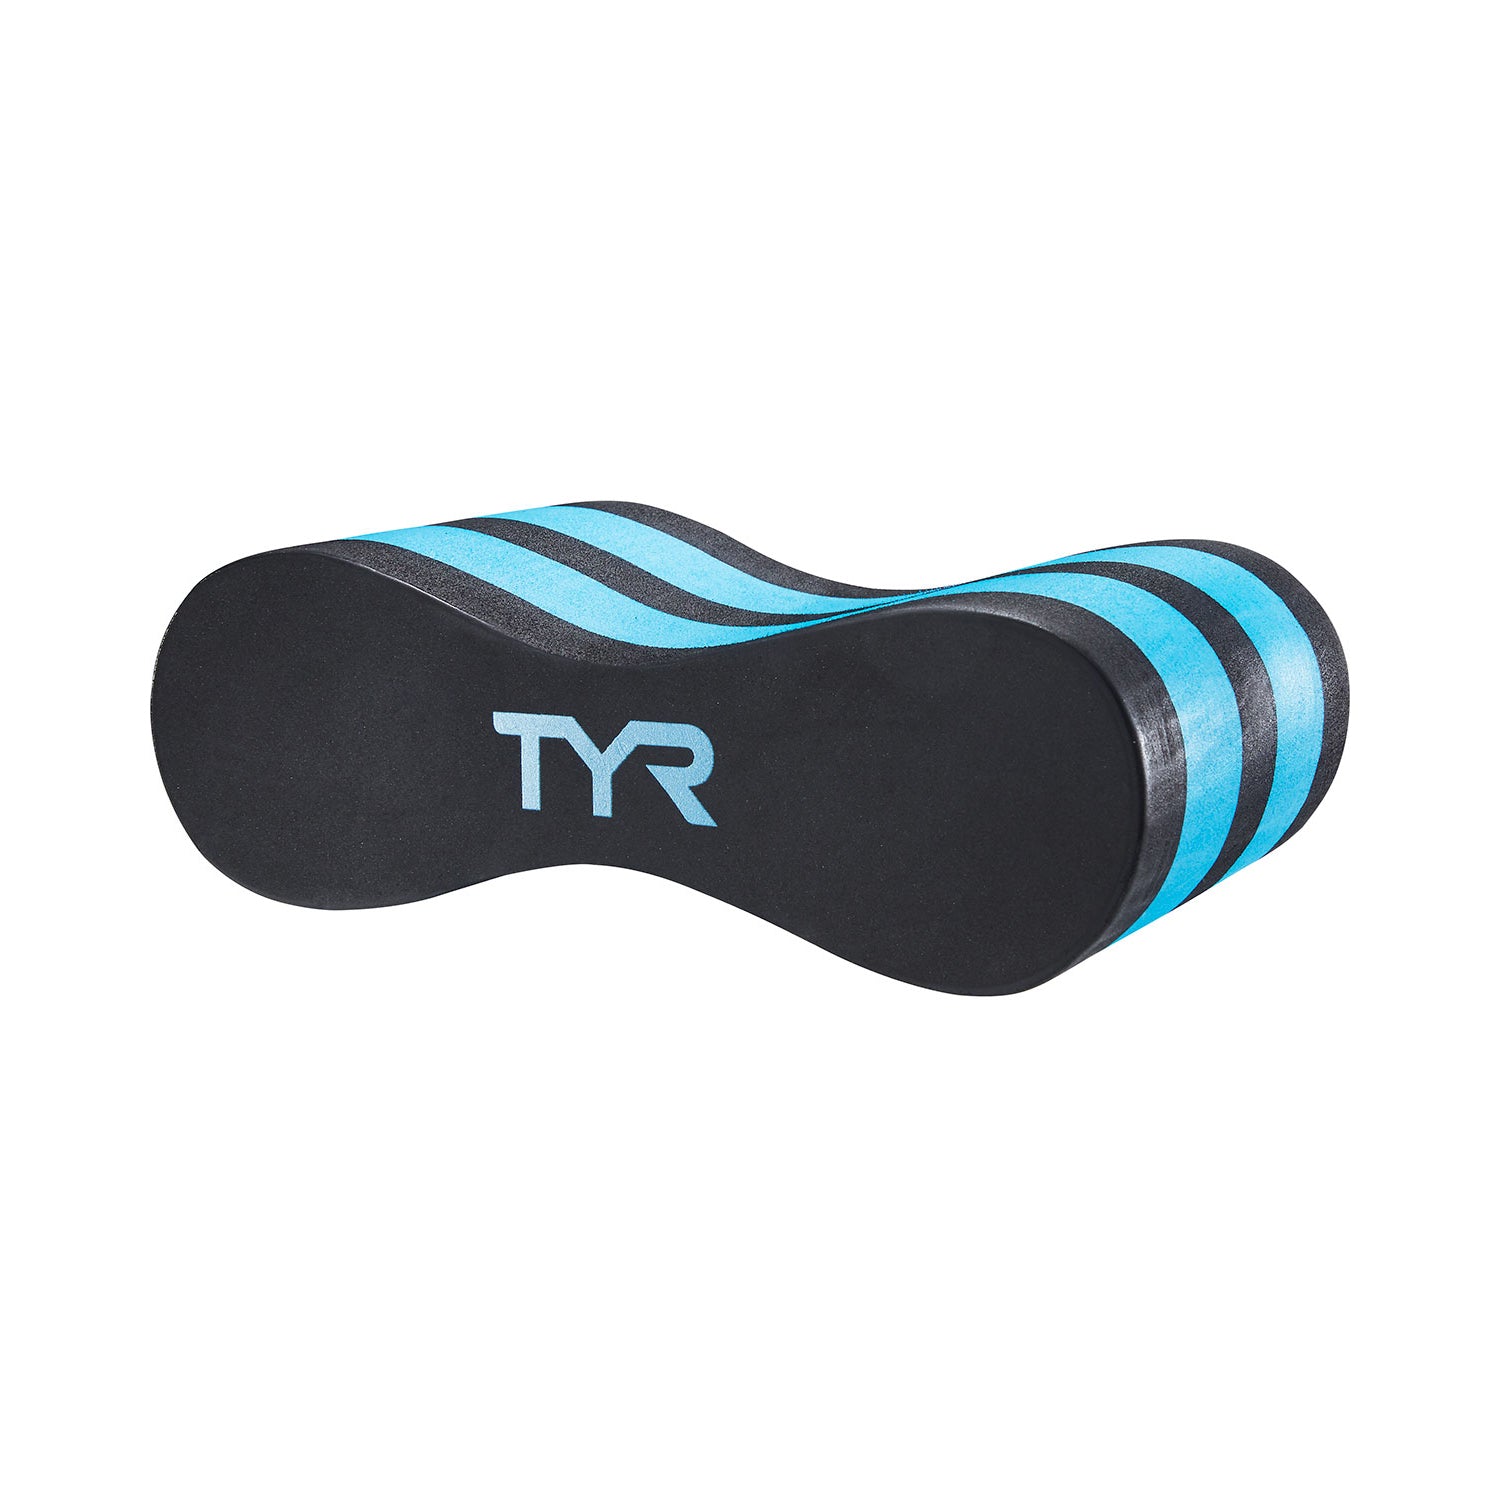 TYR Classic Pull Float - Blue/Black - 6 inch